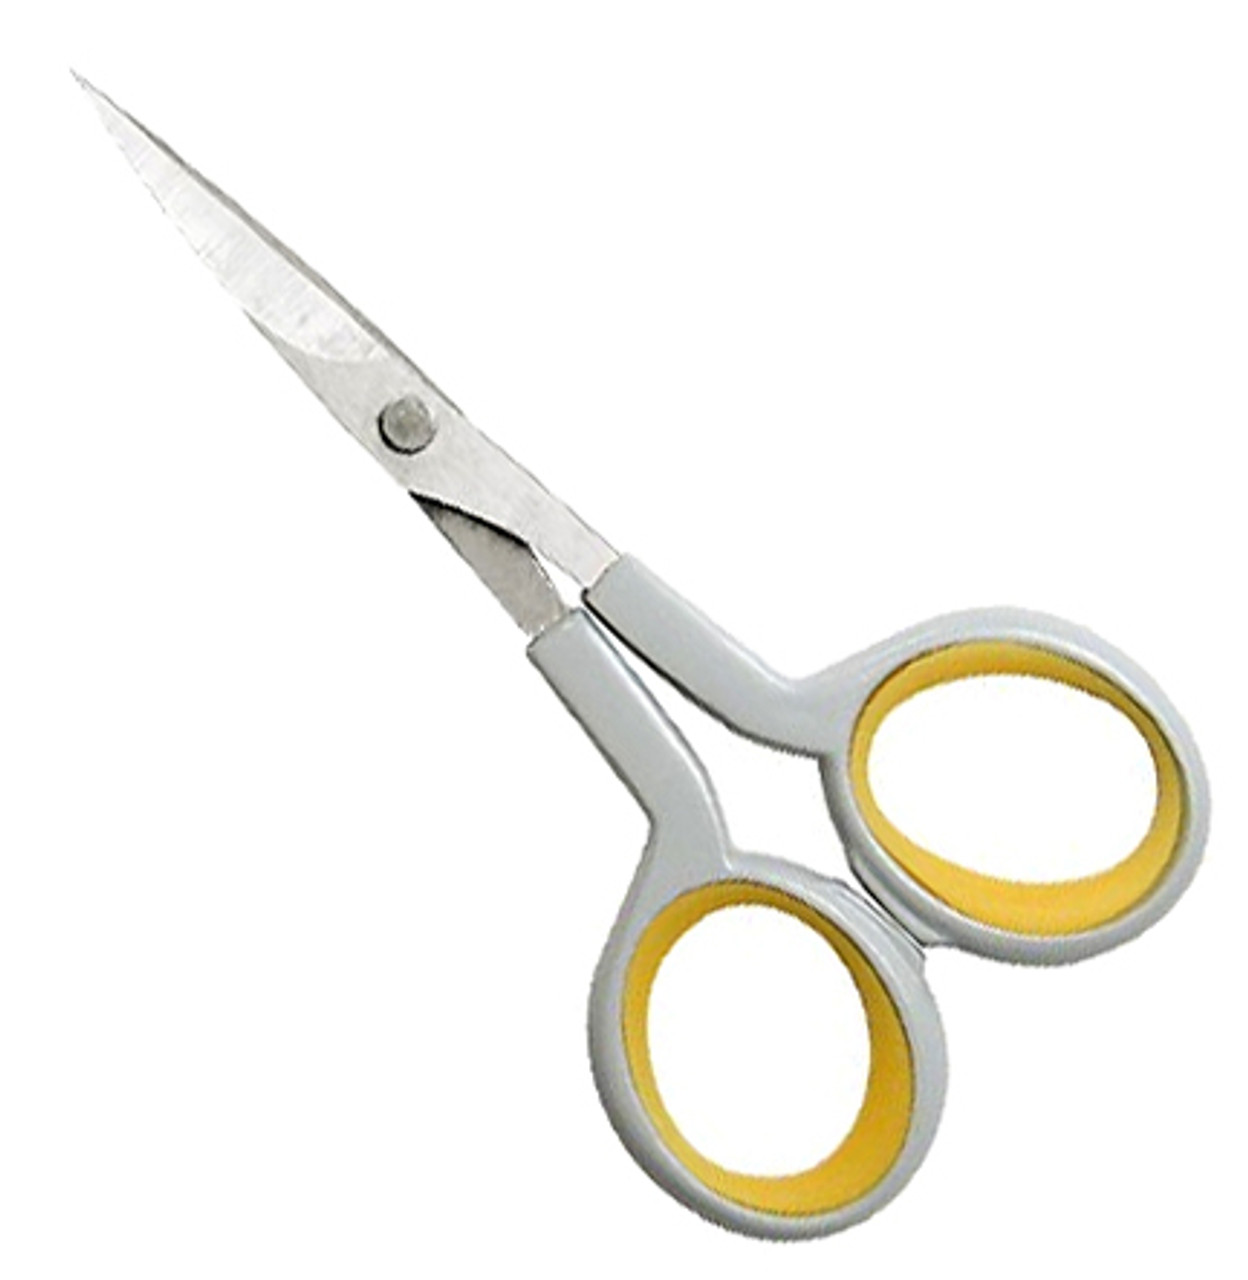 Reliable-Factory-Supply-Wescott-Titanium-Shears-4"-Curved